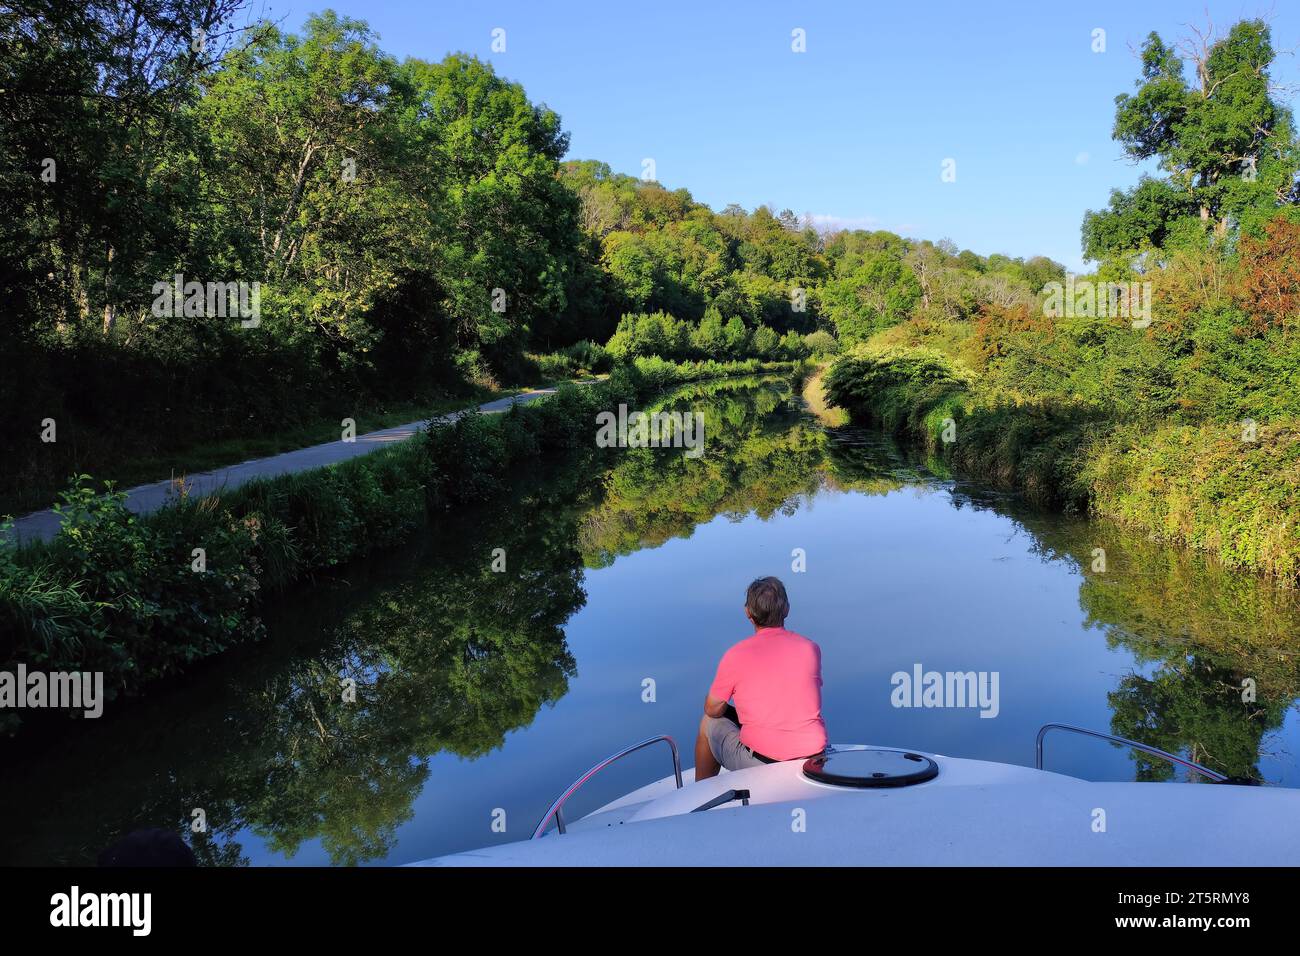 Canal du Nivernais: Cruising along Nivernais Canal with older man on bow of boat and mirror reflections of trees in Burgundy, France Stock Photo